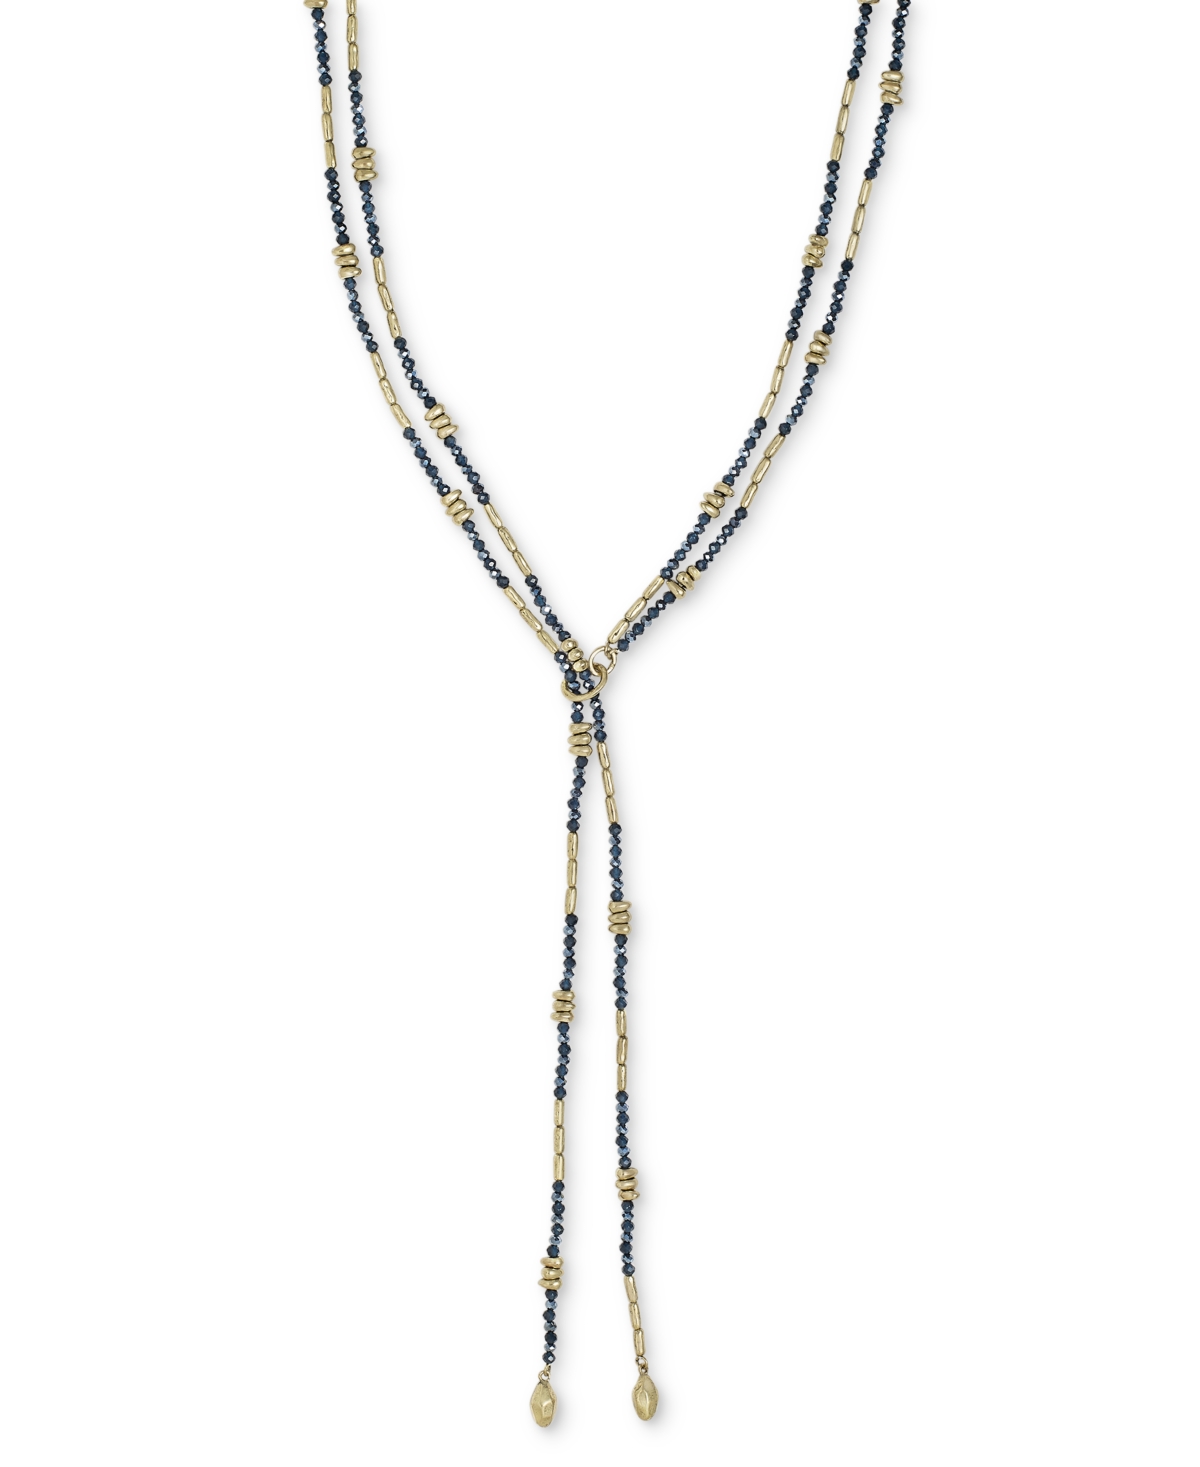 Gold-Tone Beaded Double-Row 36" Lariat Necklace, Created for Macy's - Blue